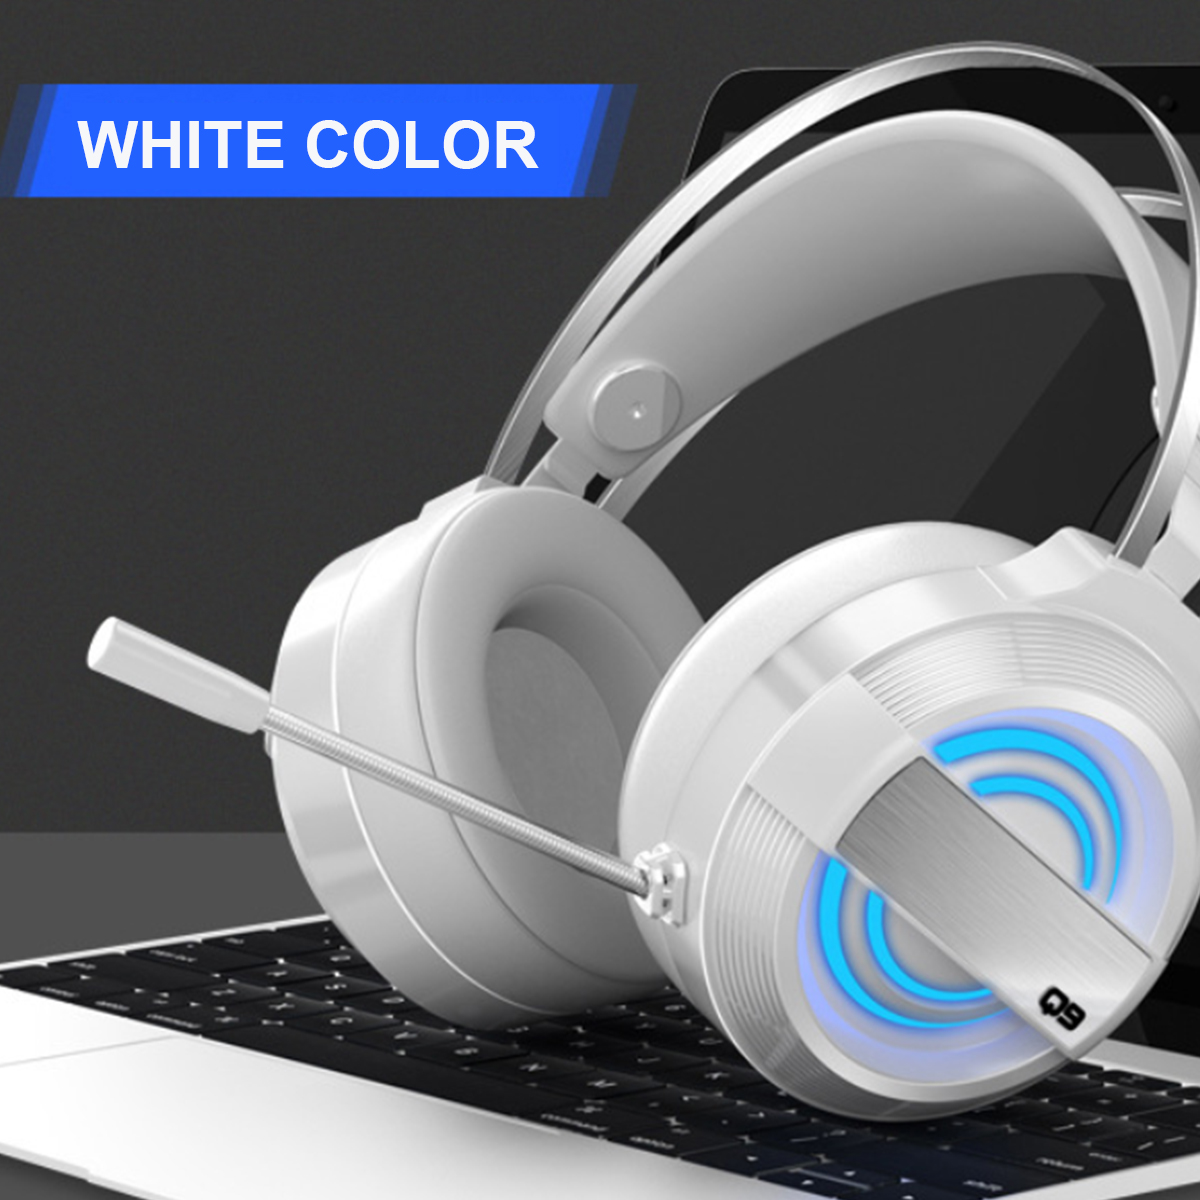 Bakeey-Gaming-Headphone-USB-Port-50mm-Driver-Headset-Foldable-Over-Ear-Gaming-Headset-Noise-Cancelli-1747835-14